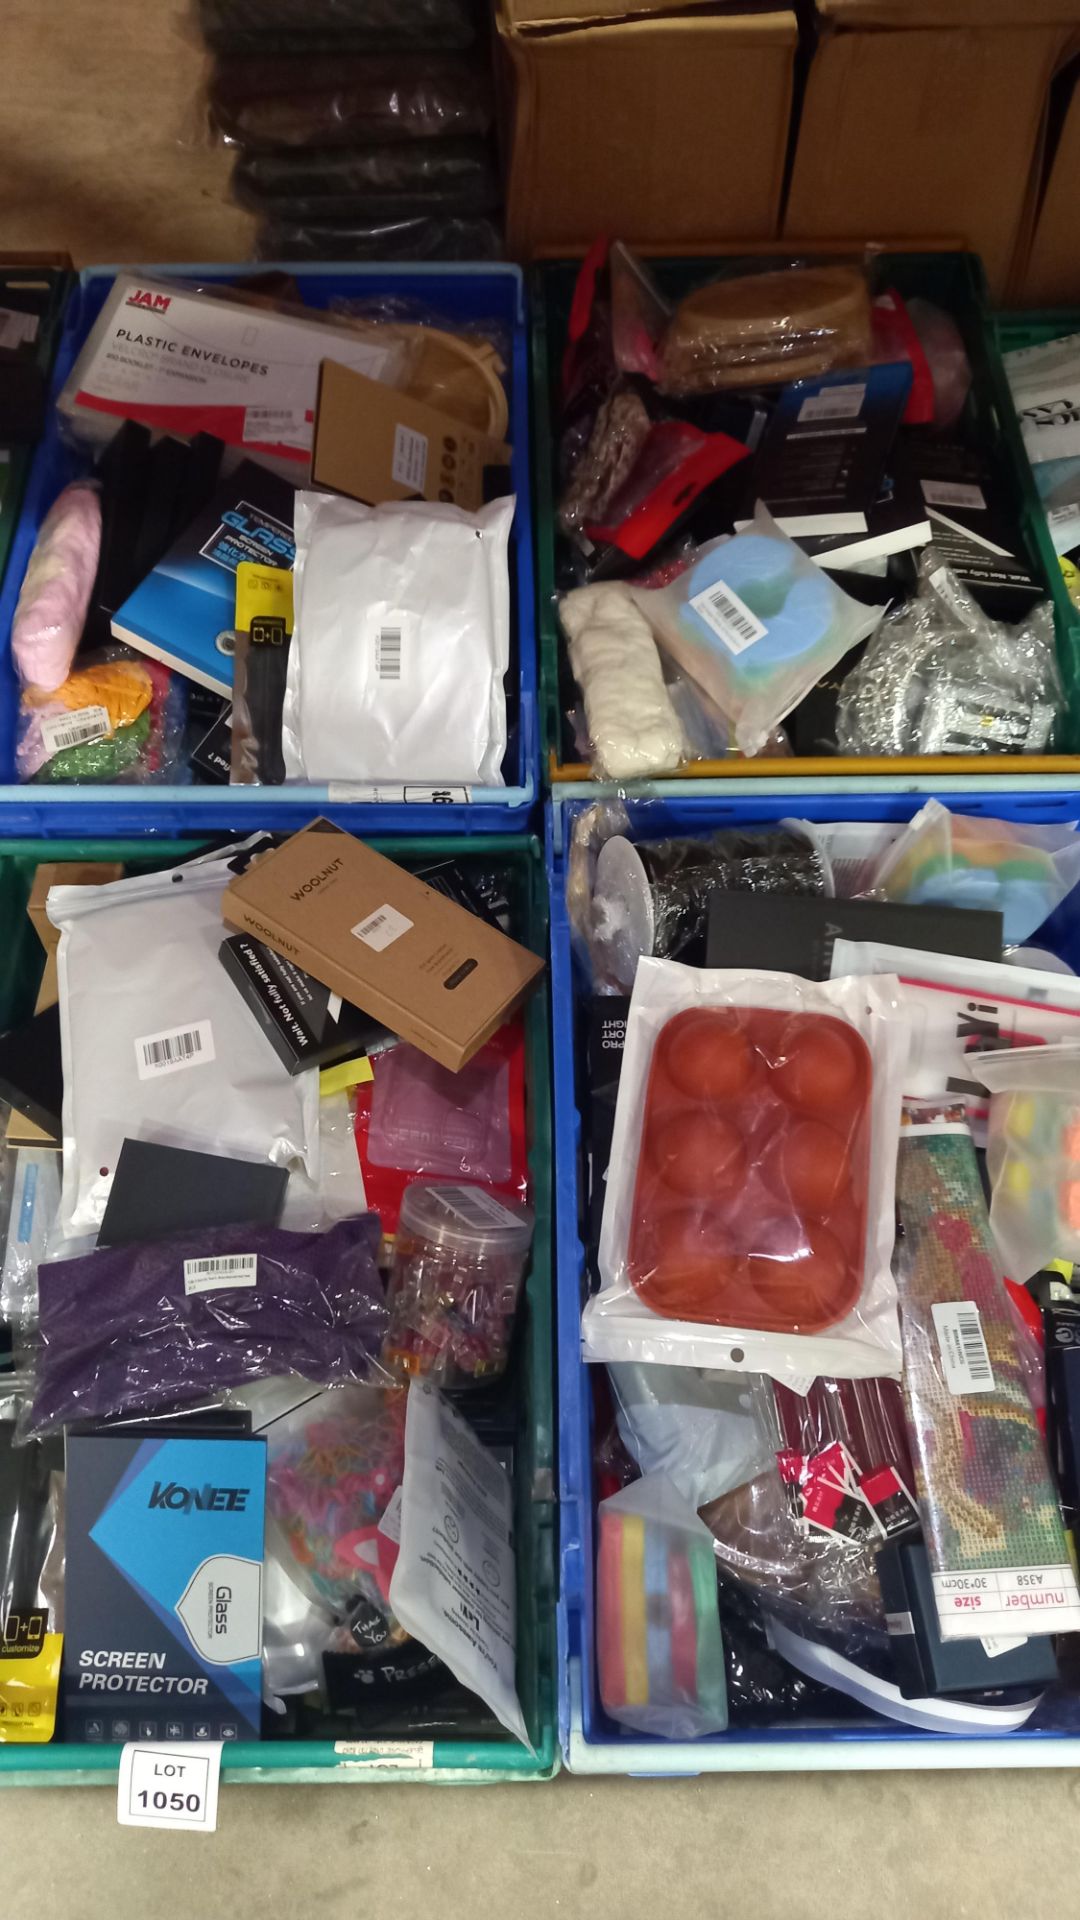 4 TRAYS CONTAINING LARGE QUANTITY OF ASSORTED ITEMS INCLUDING PLASTIC ENVELOPES, BABY TOYS, HAIR